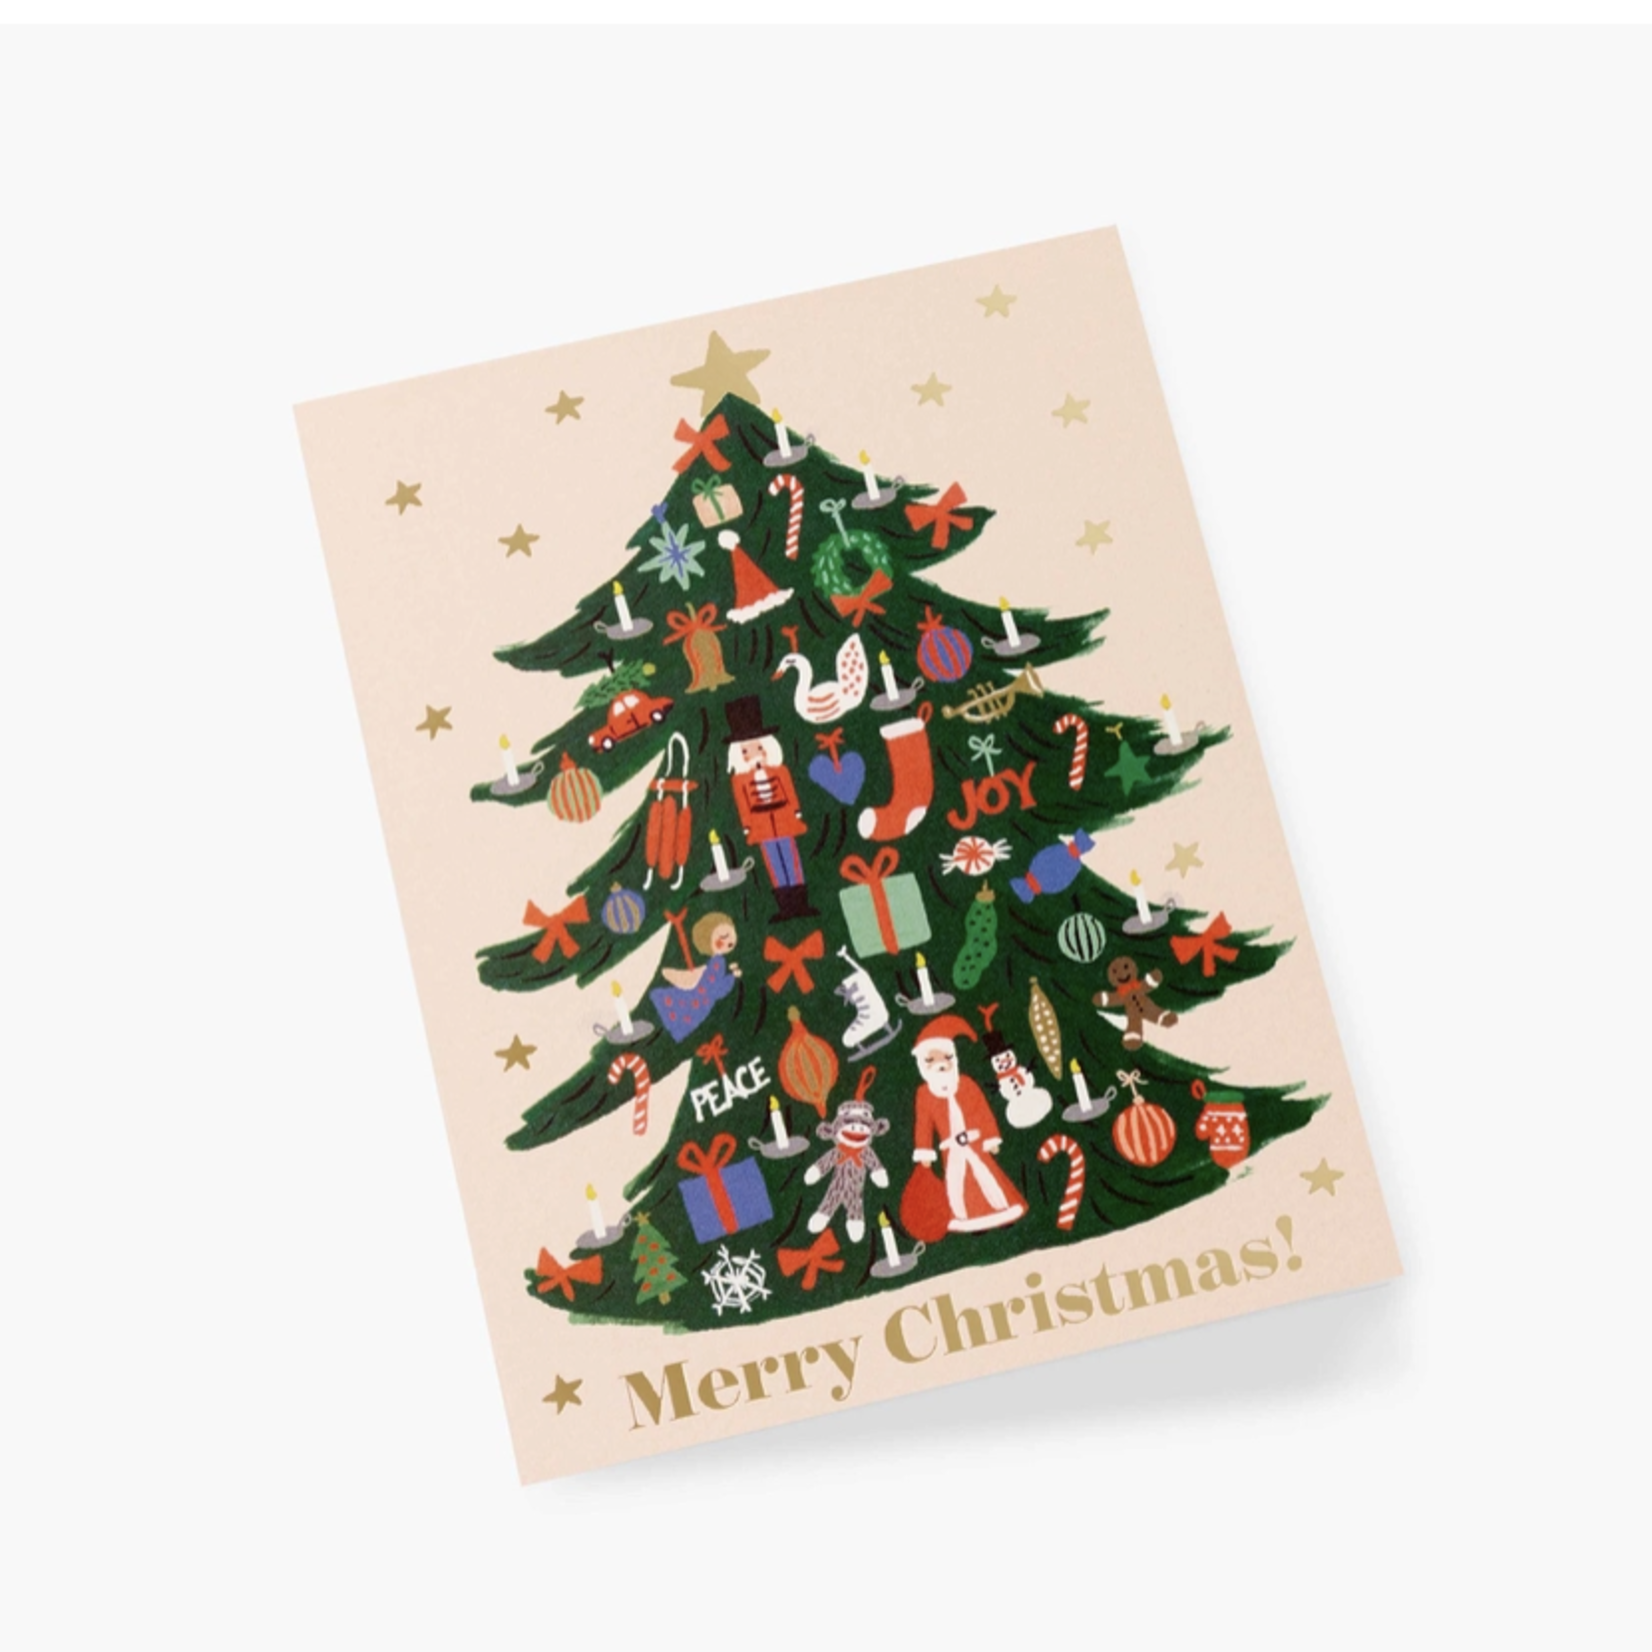 Trimmed Tree holiday card